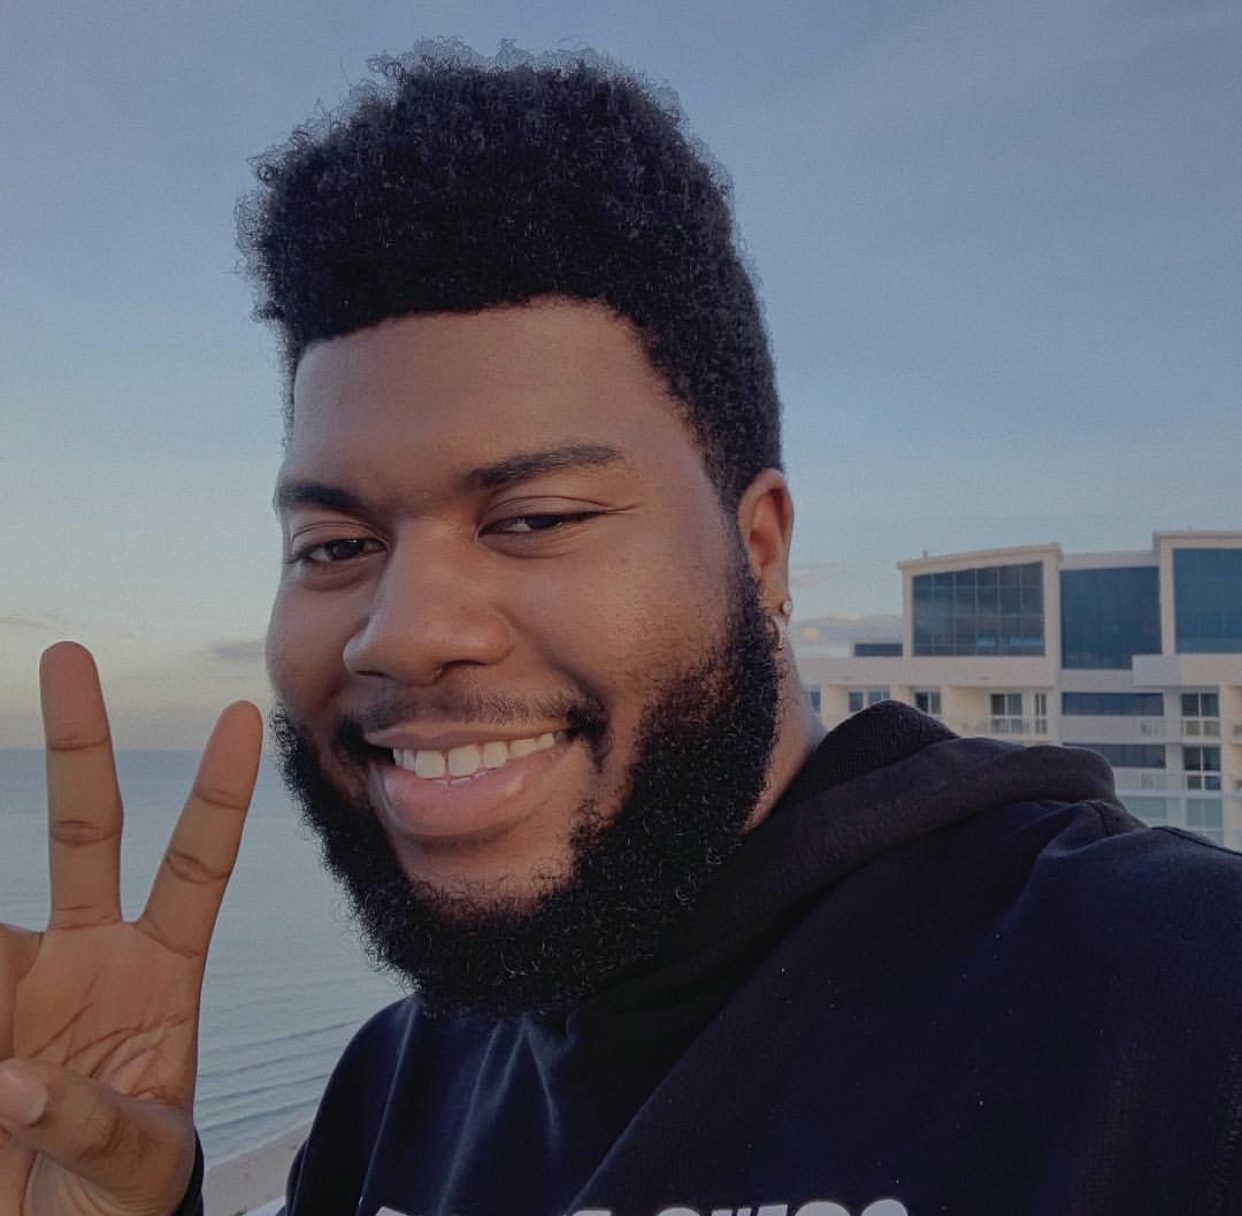 Khalid Just Became The Biggest Artiste In The World On Spotify, with Over 50M Monthly Listeners.